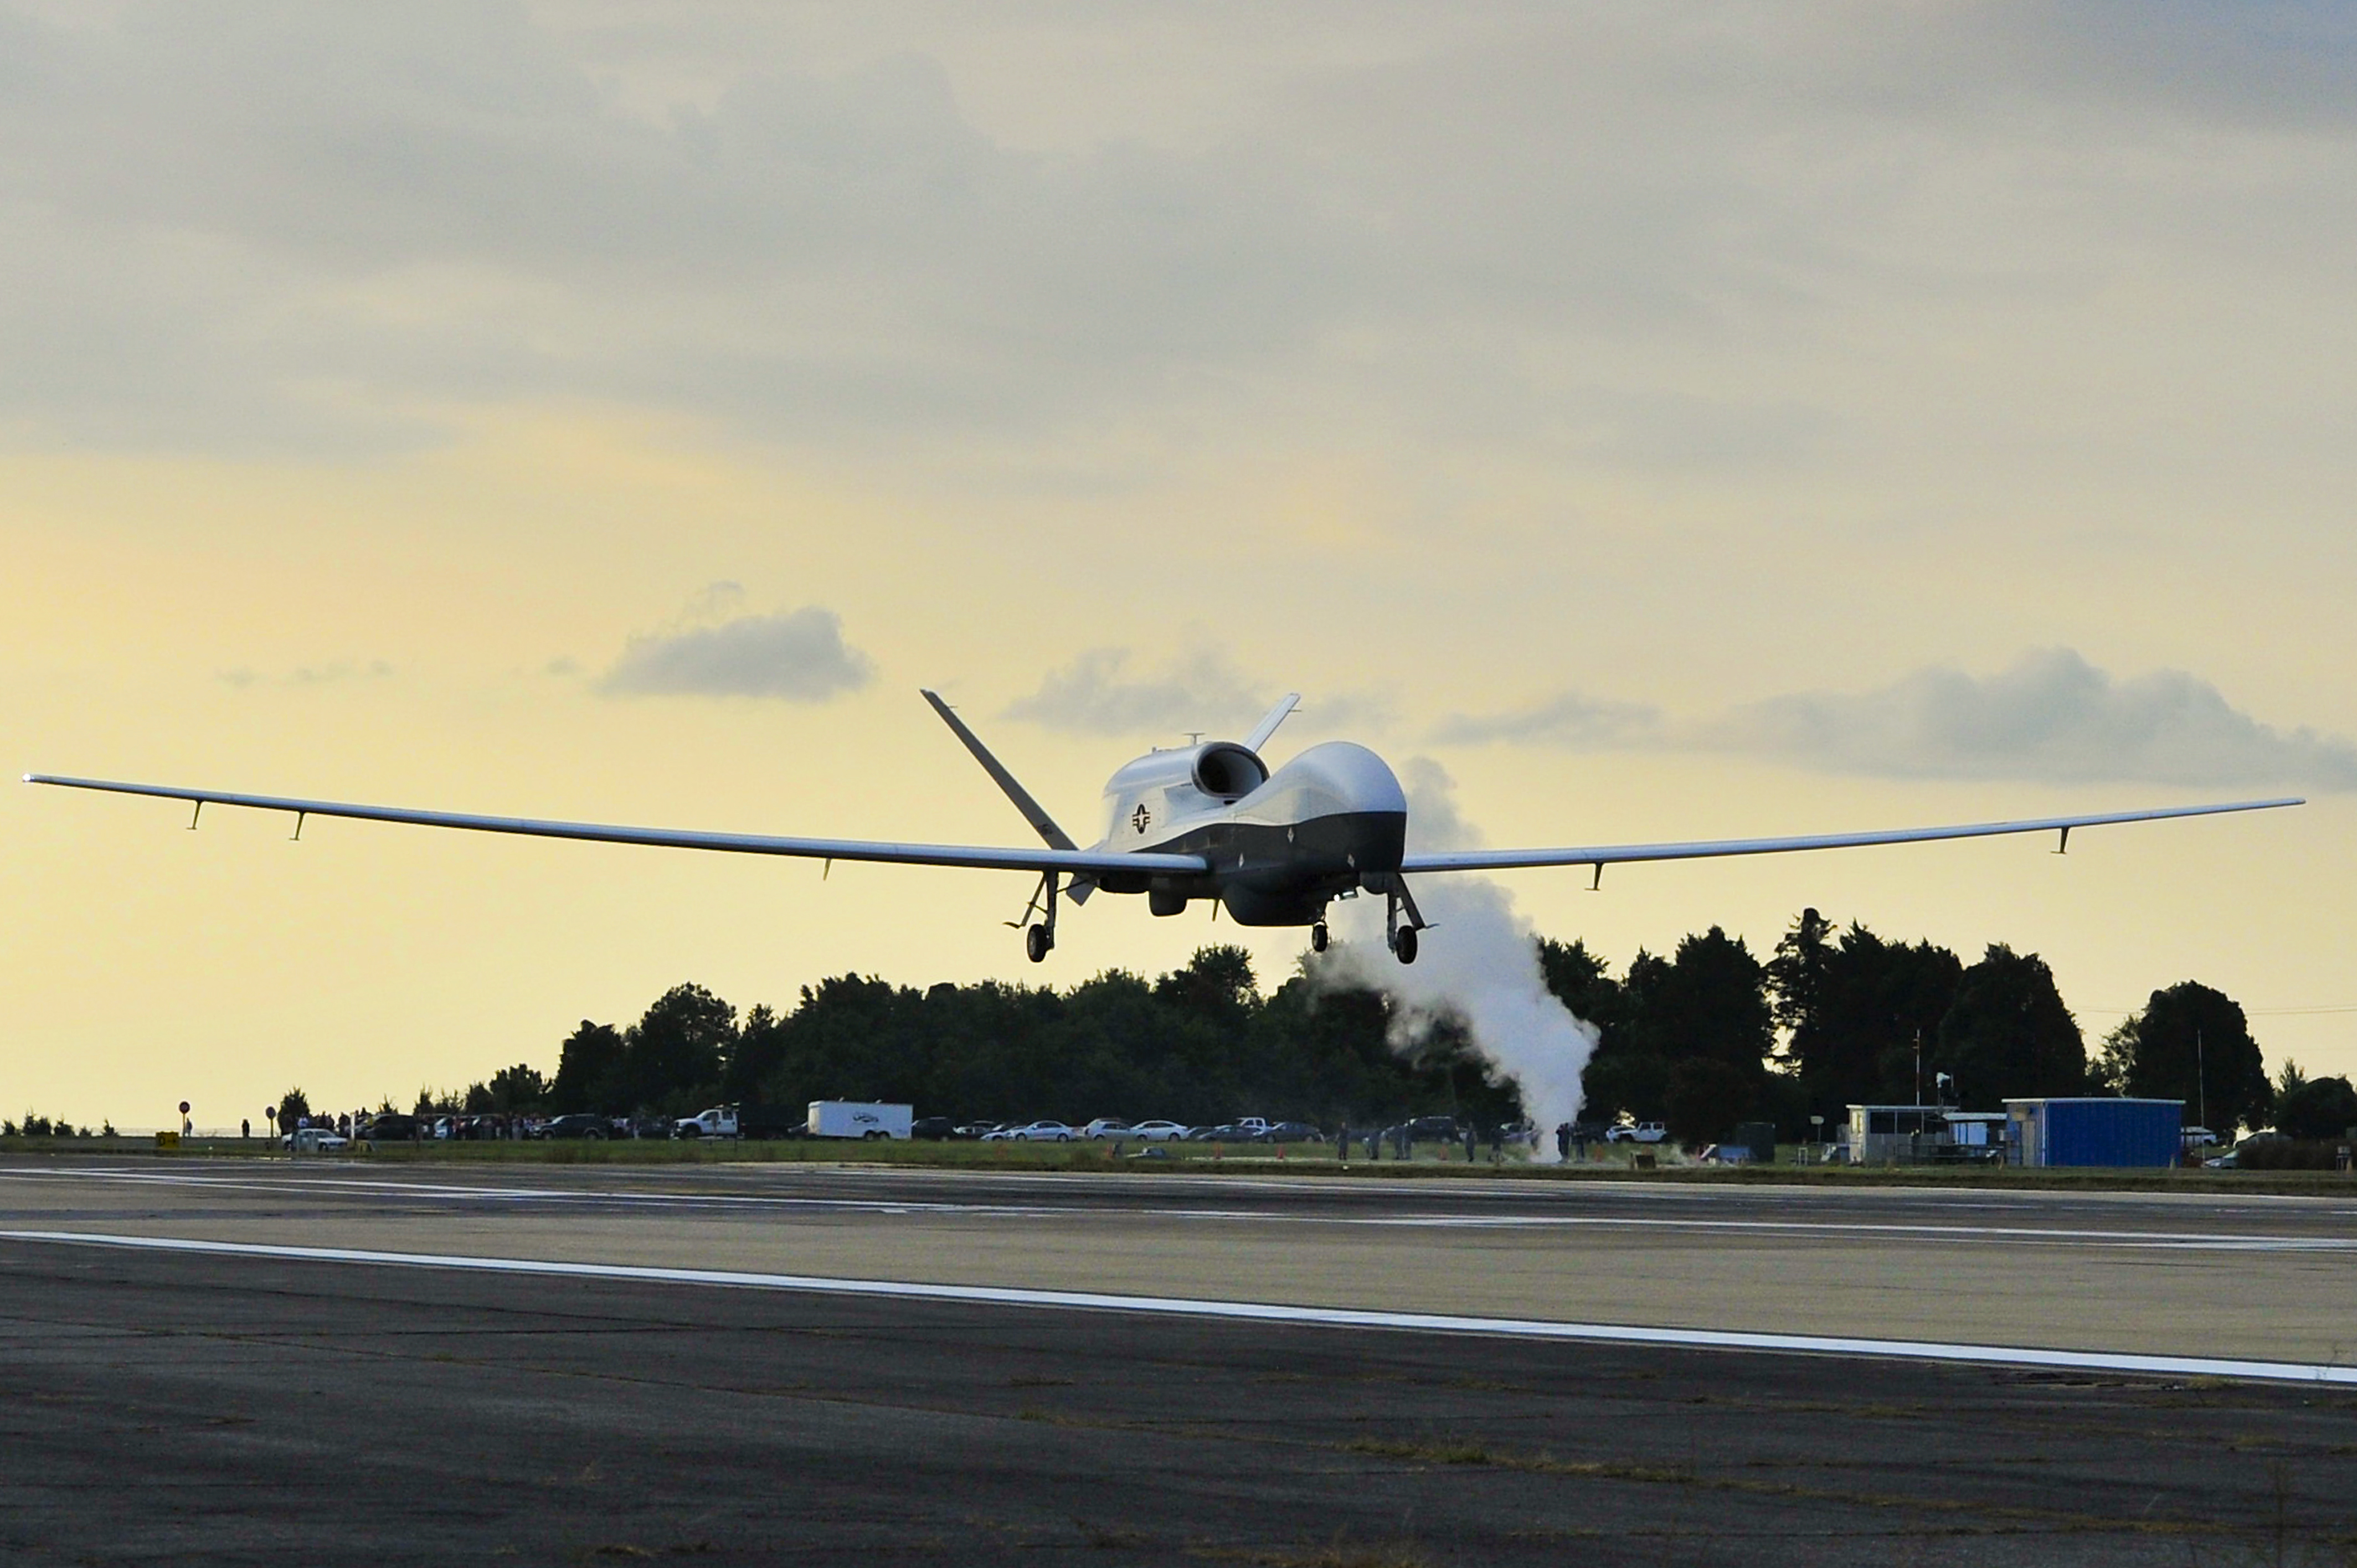 The MQ-4C Triton unmanned aircraft system approaches the runway at Naval Air Station Patuxent River, Md., after completing its inaugural cross-country flight from California on Sept. 18, 2014. US Navy photo. 